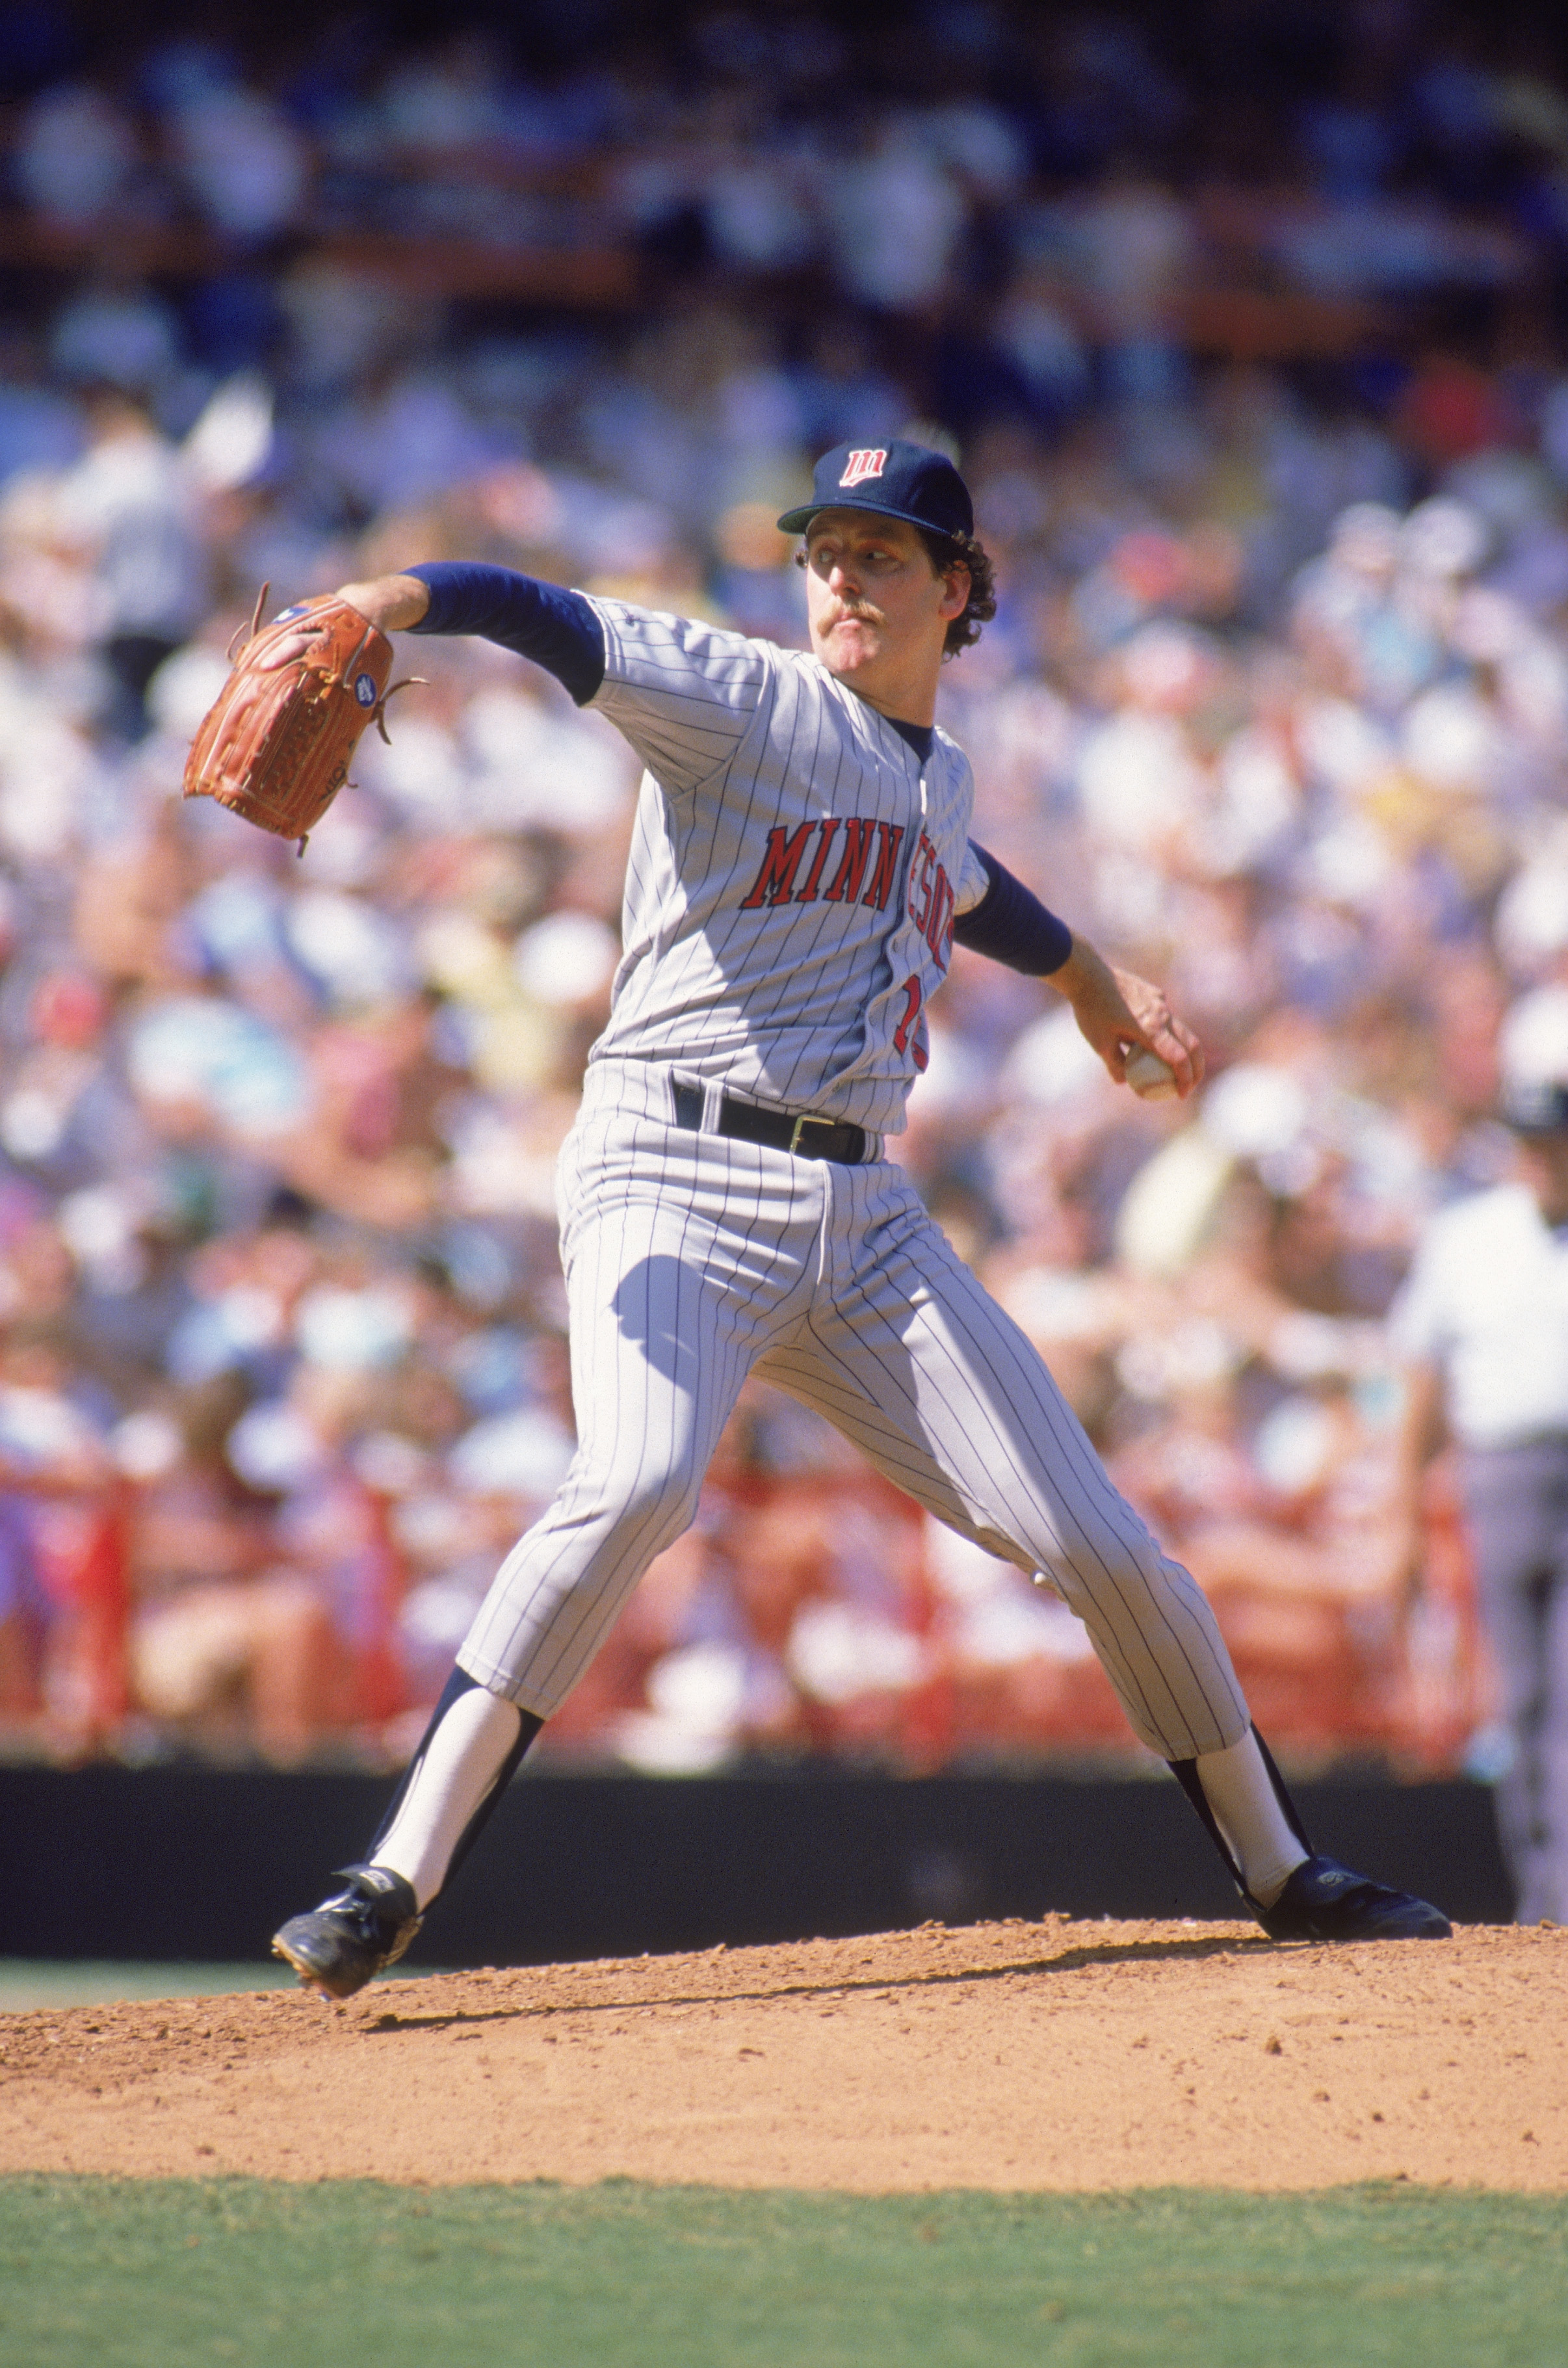 ANAHEIM, CA - 1988:  Frank Viola #16 of the Minnesota Twins pitches during an MLB game against the California Angels circa 1988 at Anaheim Stadium in Anaheim, California. (Photo by Tim DeFrisco/Getty Images)